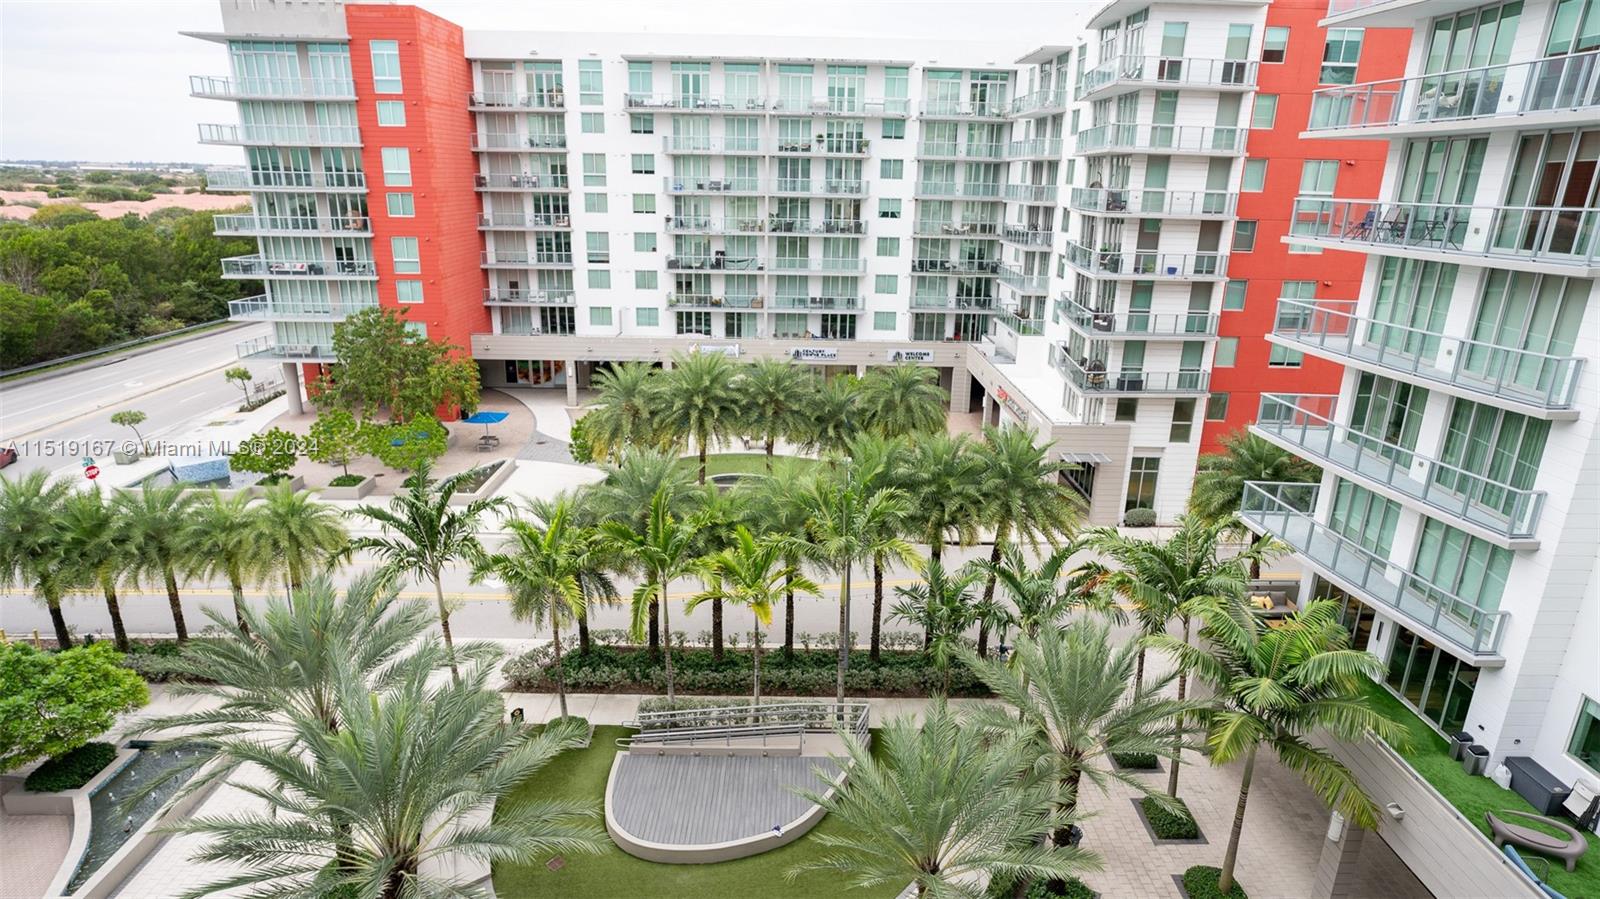 7751 NW 107th Ave #608 For Sale A11519167, FL